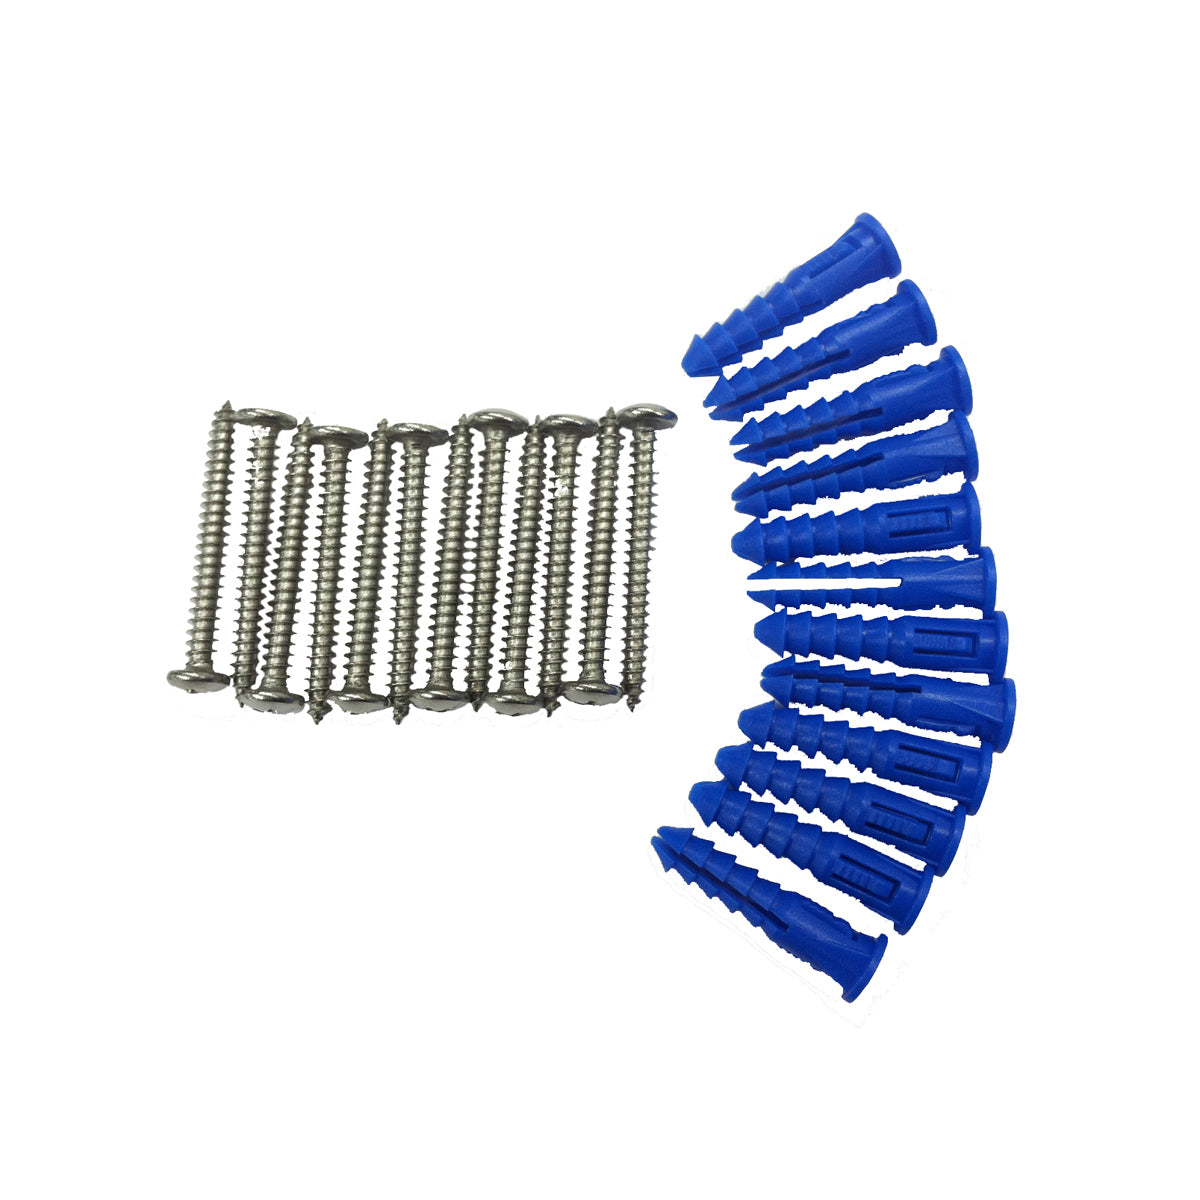 Triton Products 12 Steel Screws & 12 Plastic Wall Anchors for Mounting  Steel Pegboard System